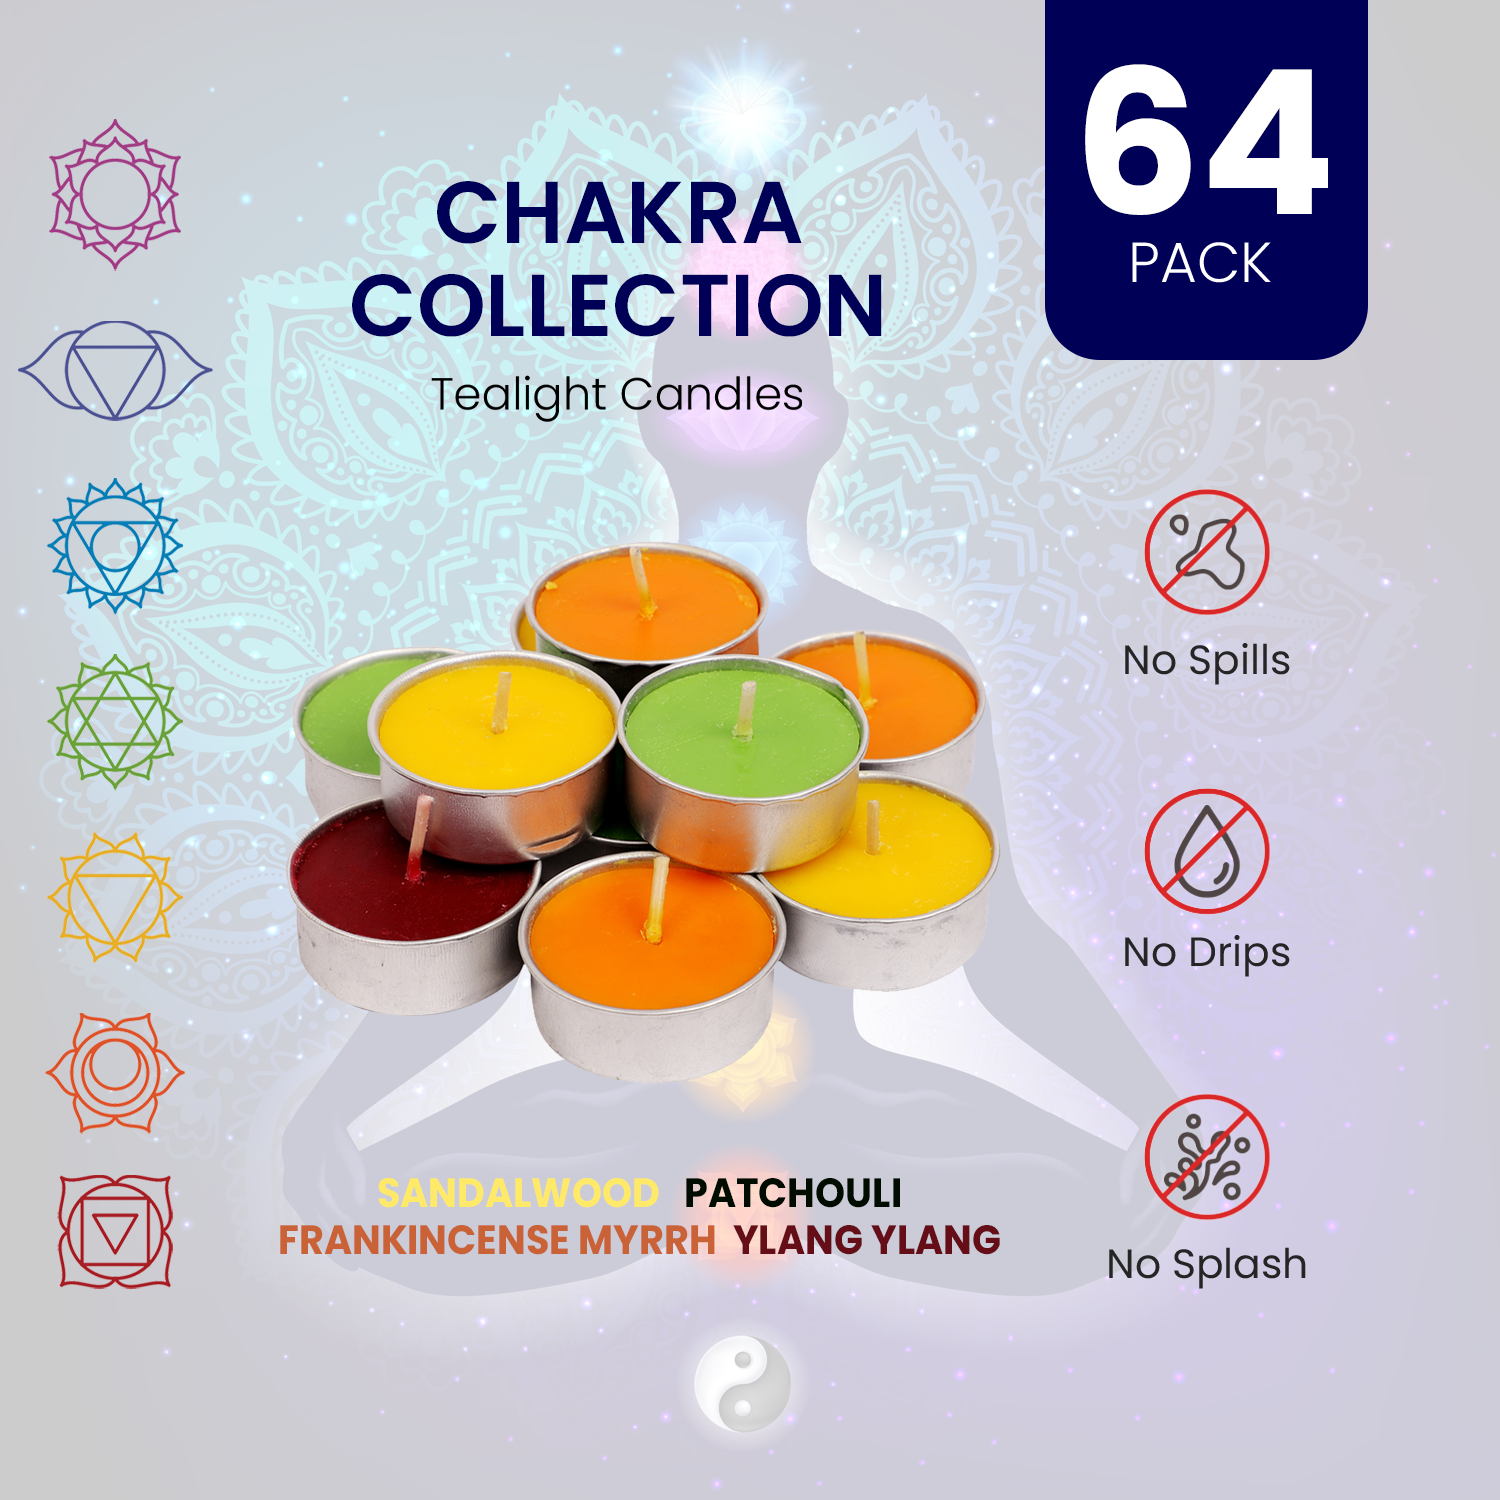 Scented Tealights Bundle - Variety - 90 Pack, Chakra & Christmas - 64 Pack each